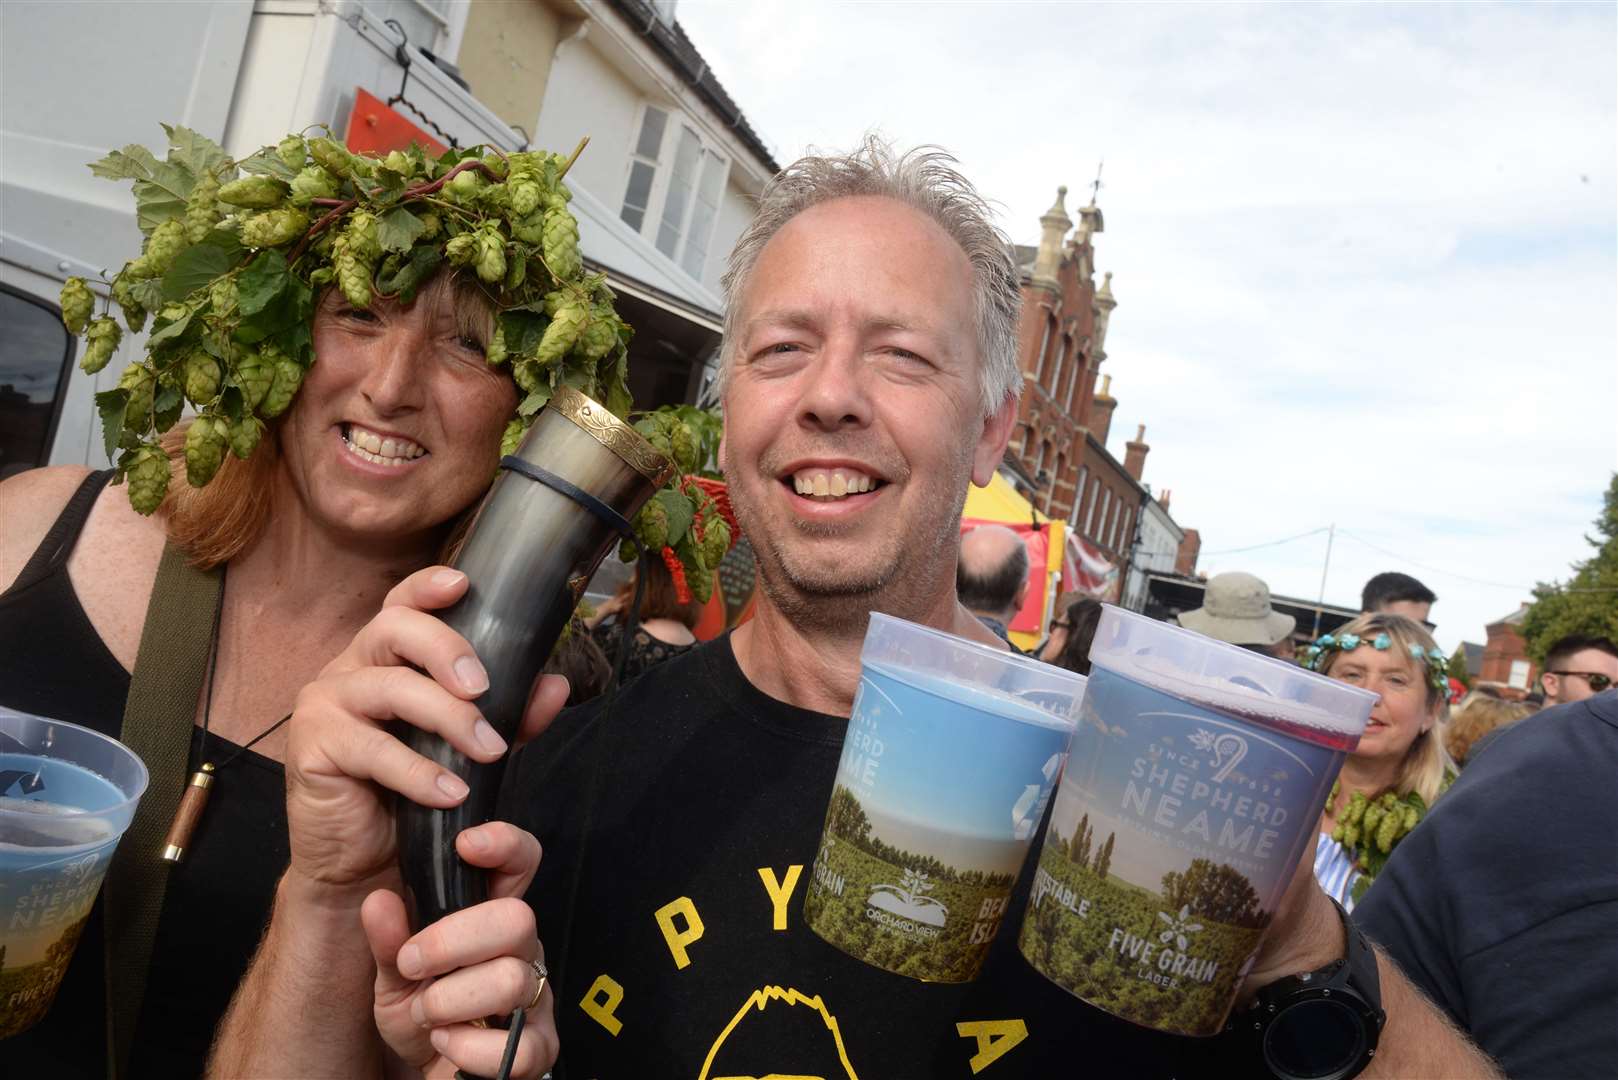 Visitors can enjoy a weekend of local beer and live music again as the Hop Festival returns. Picture: Chris Davey